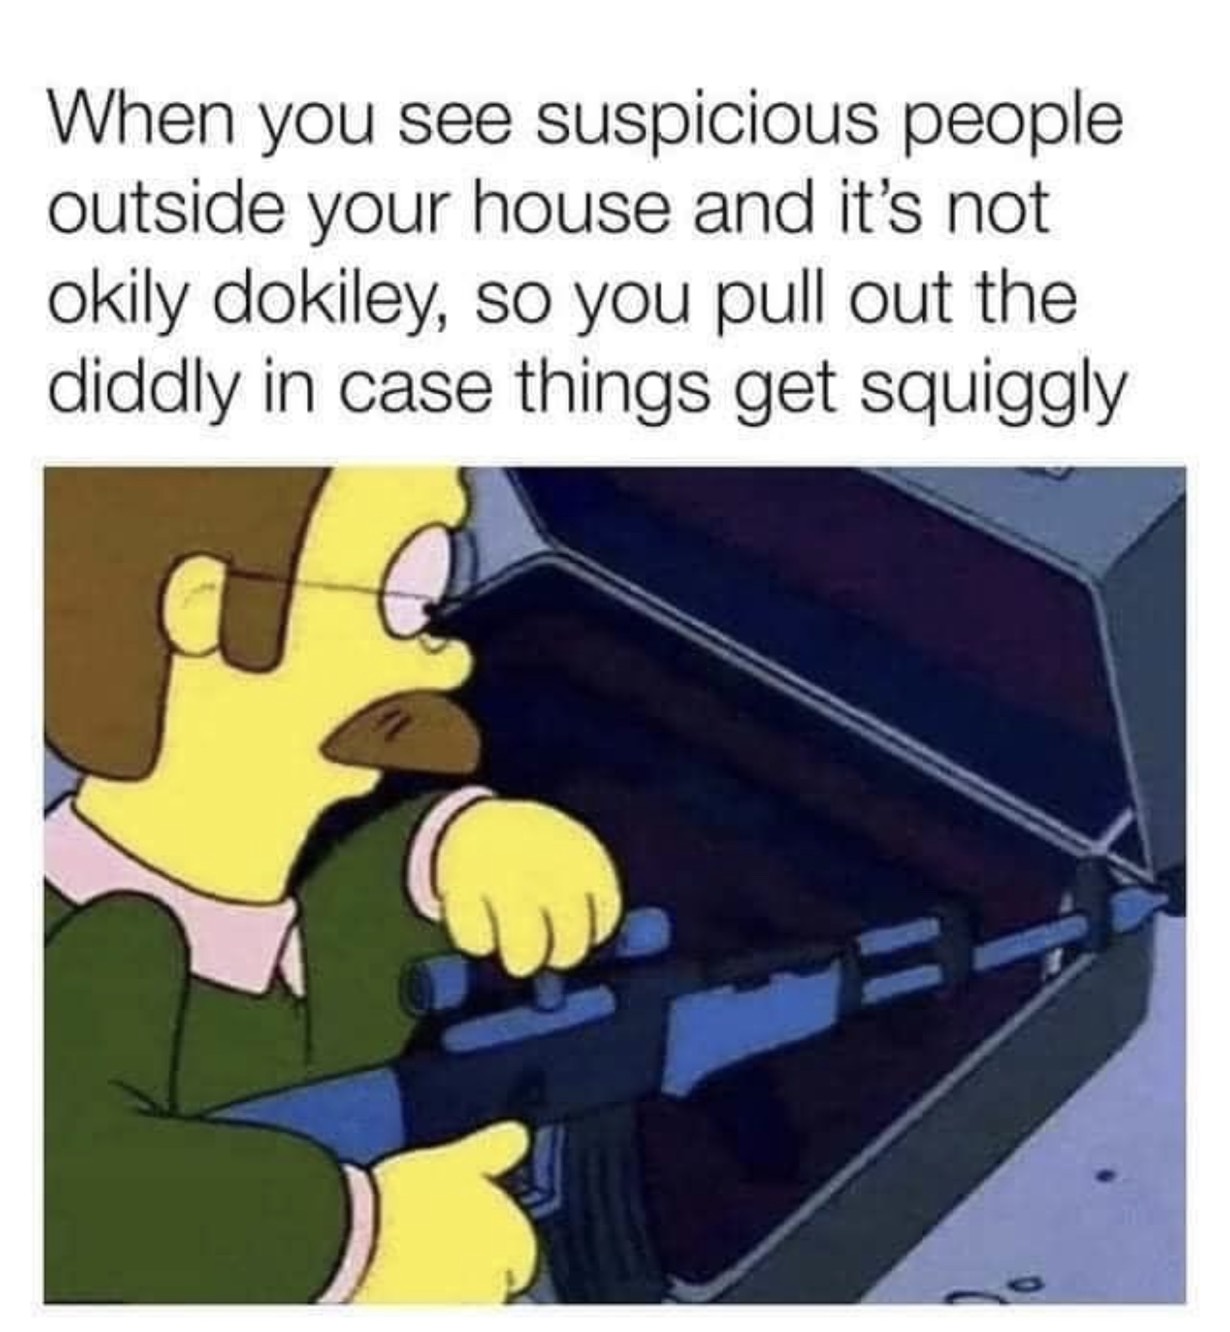 funny pictures - When you see suspicious people outside your house and it's not okily dokiley, so you pull out the diddly in case things get squiggly